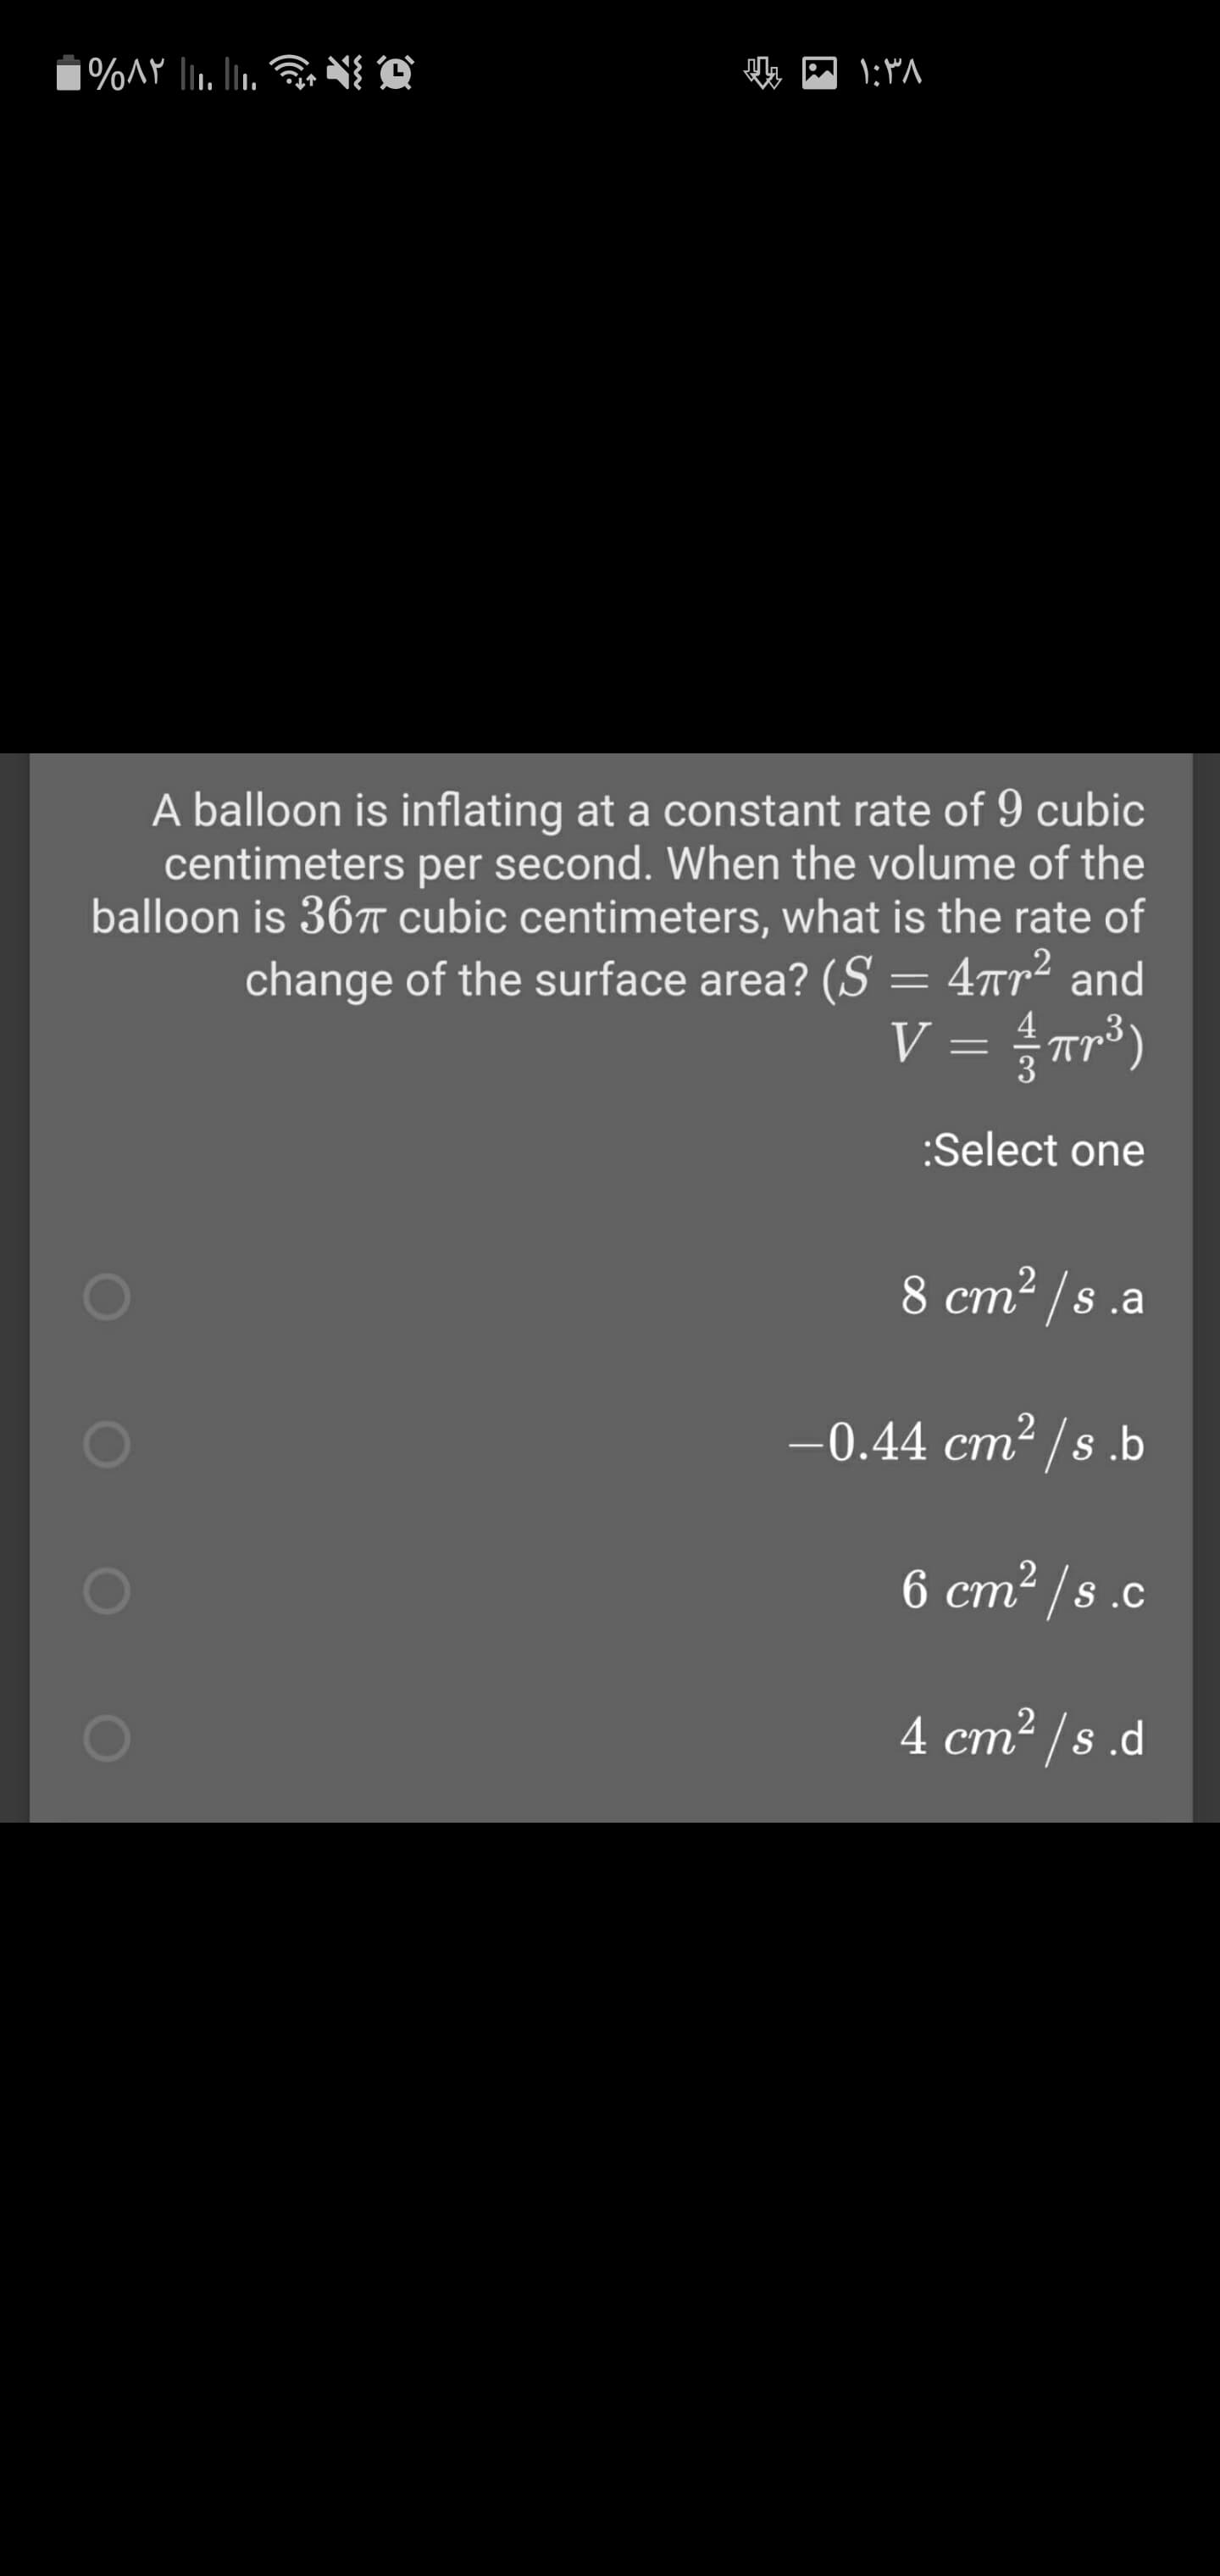 A balloon is inflating at a constant rate of 9 cubic
centimeters per second. When the volume of the
balloon is 36T cubic centimeters, what is the rate of
change of the surface area? (S = 4tr² and
V = r³)
3
:Select one
8 cm² /s .a
-0.44 cm² /s.b
6 cm2 /s.c
ст
4 cm2 /s .d
ст
